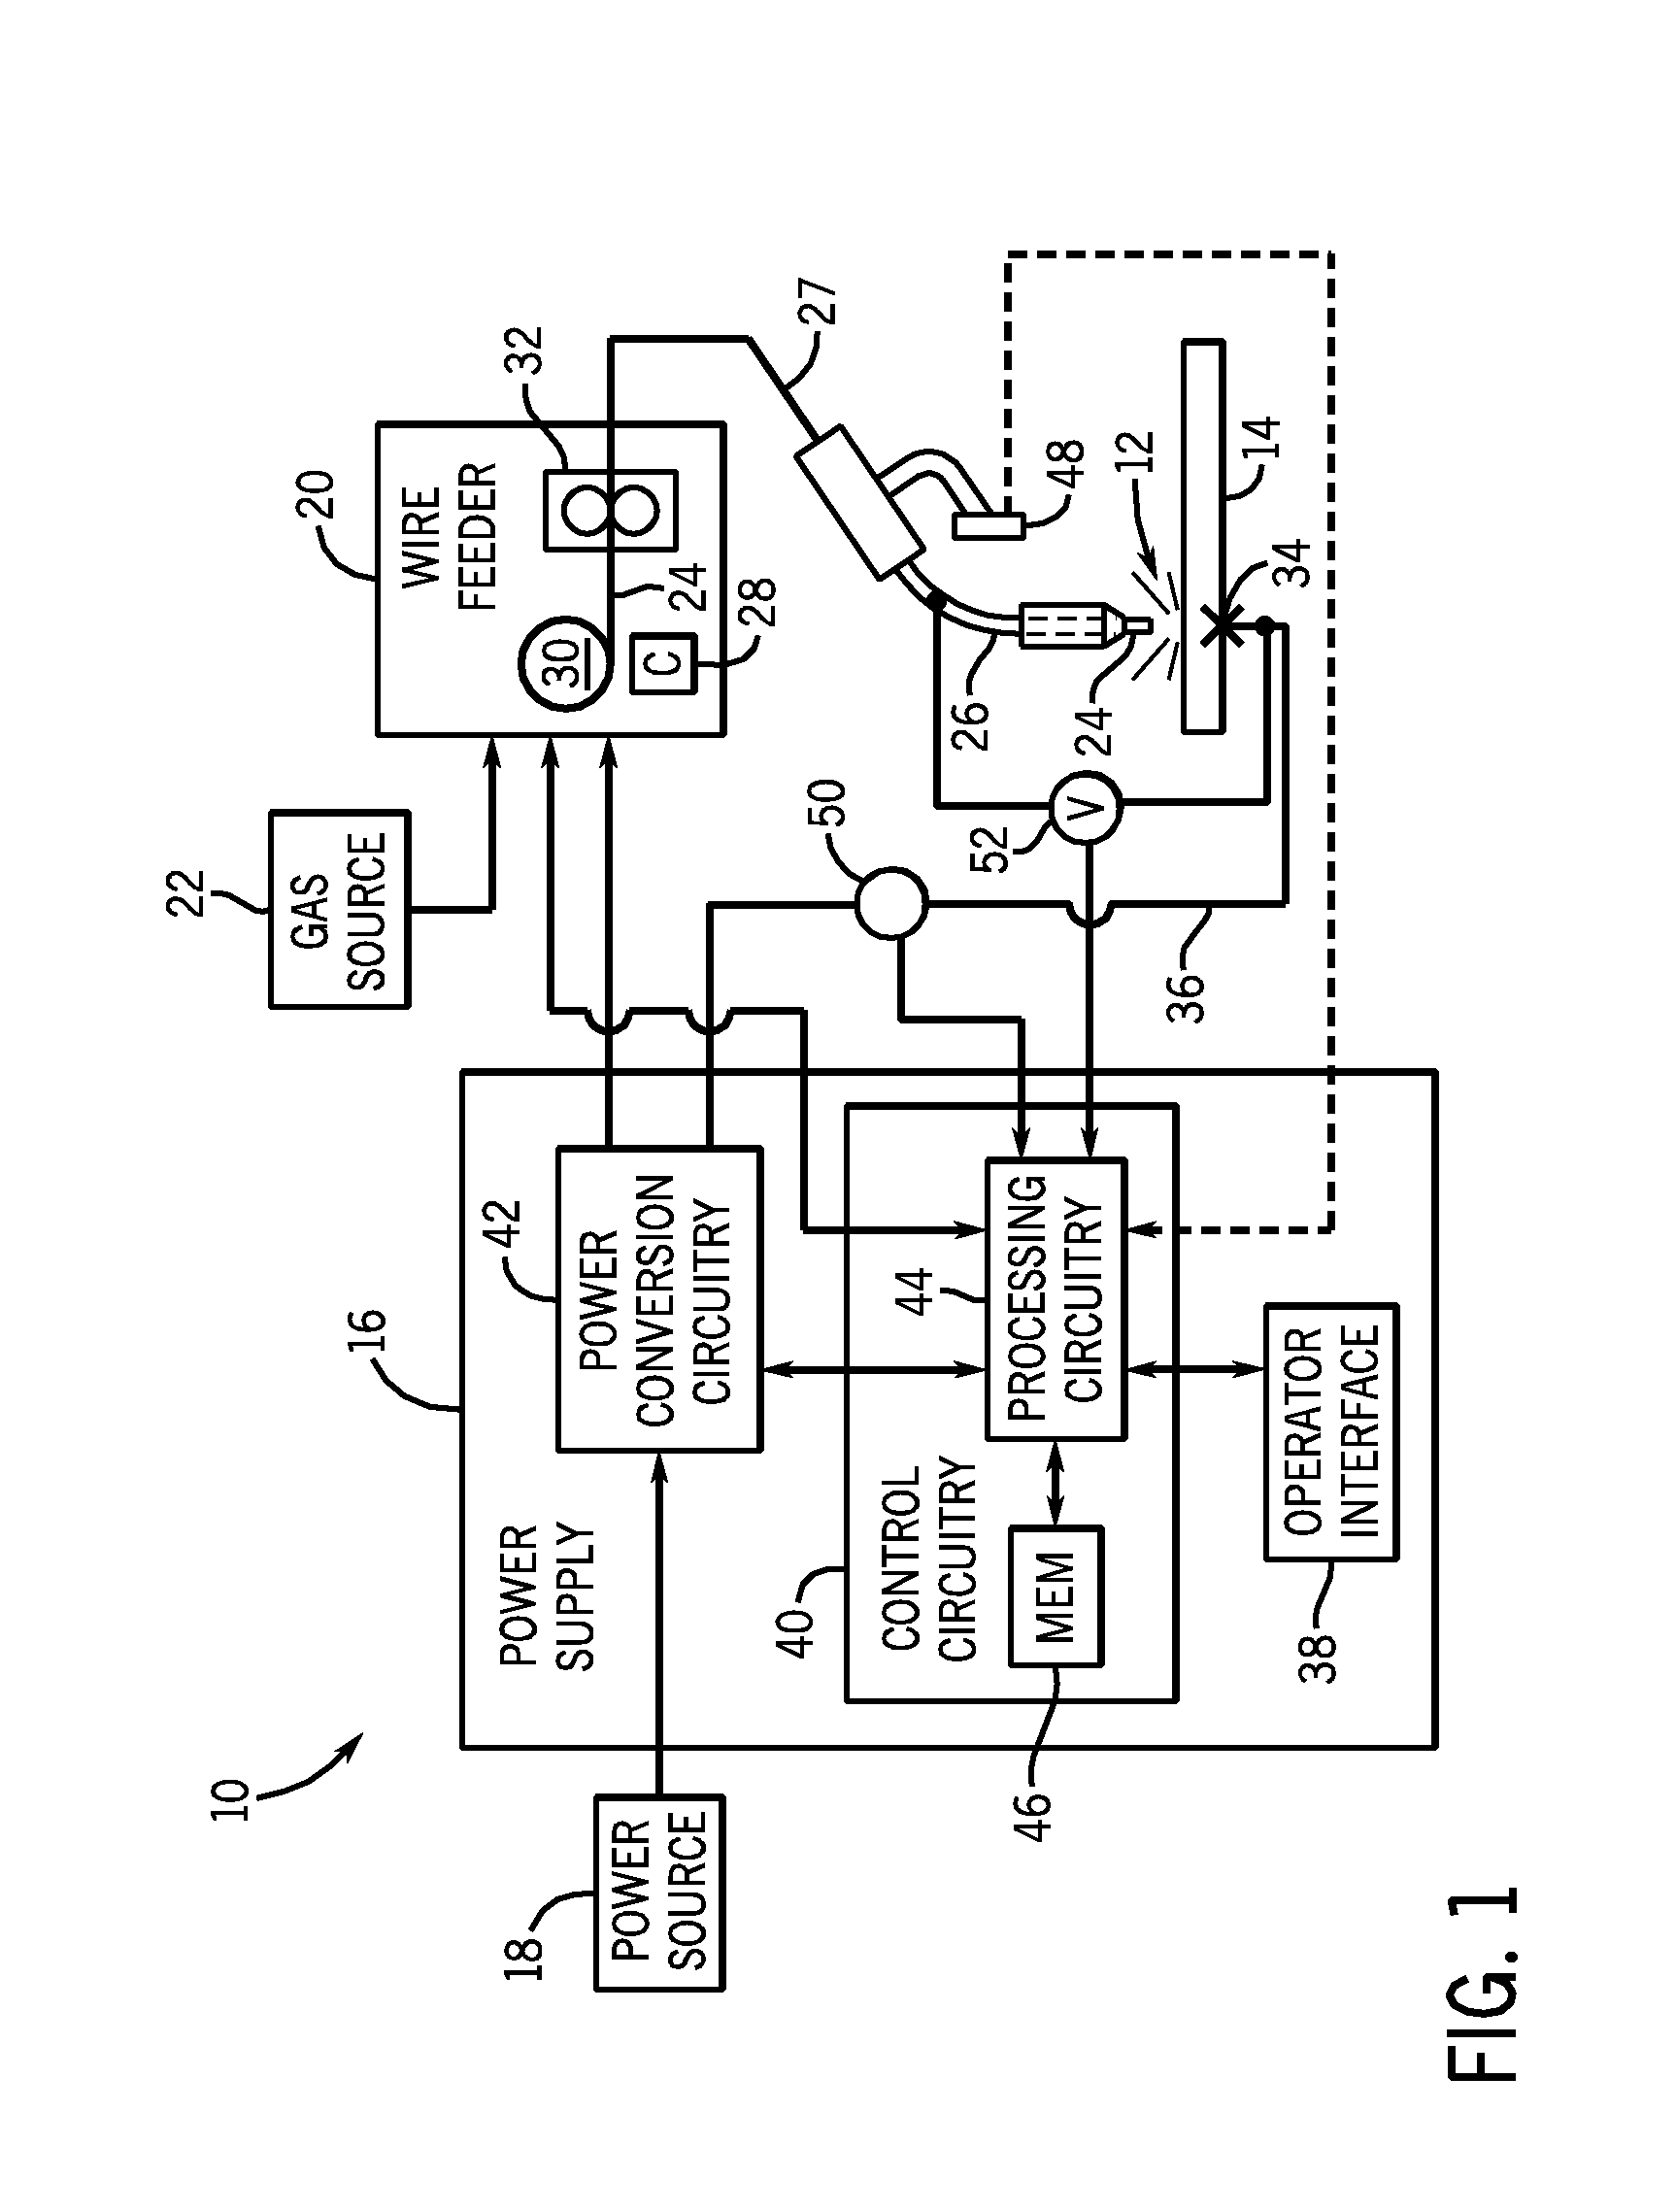 System and method for controlling an arc welding process